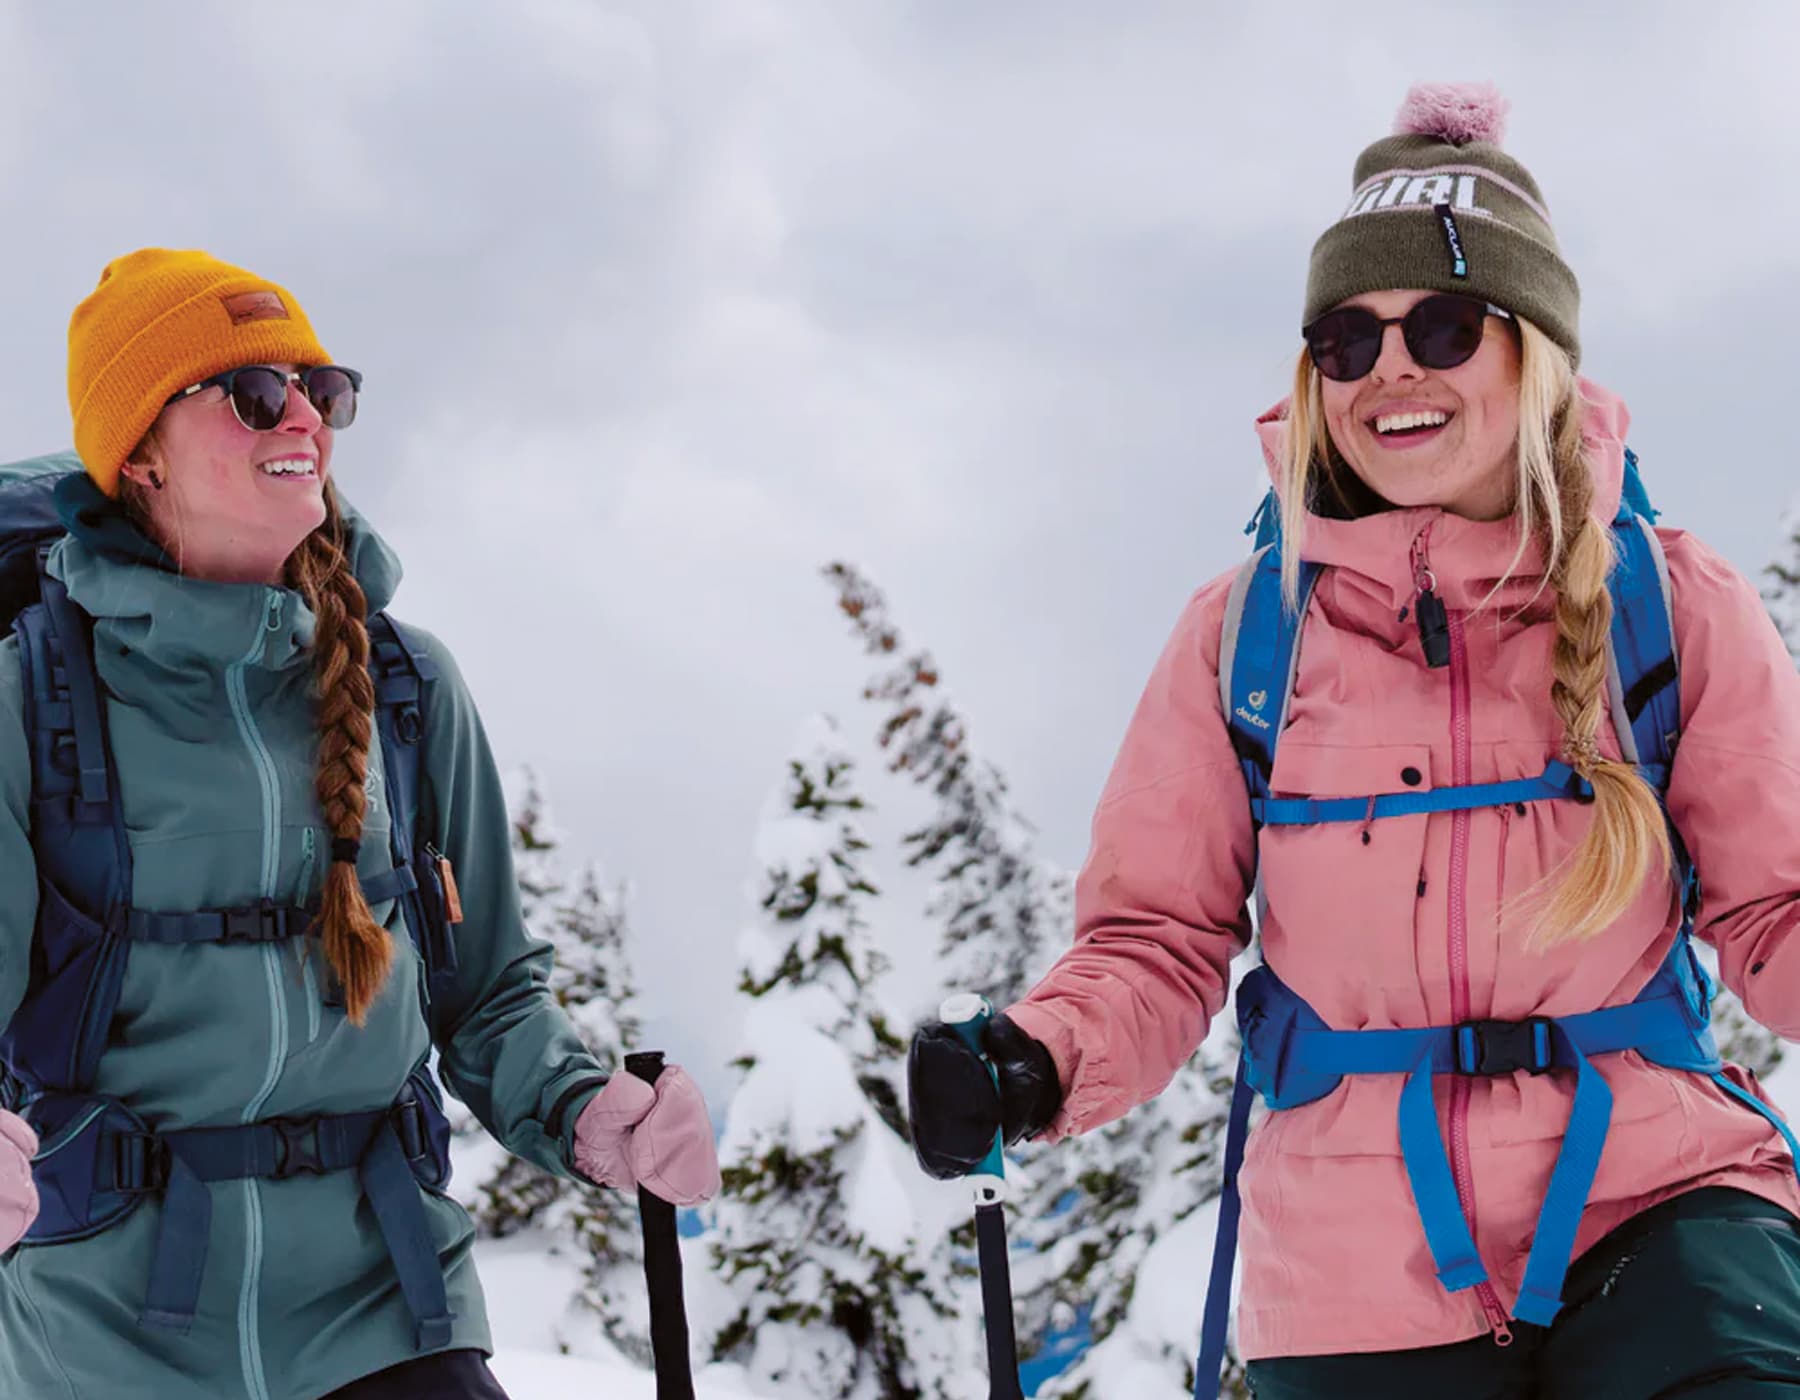 Two females snowshoeing, laughing and having a good time outside in the snow. They are both wearing backpacks with the female on the left wearing a green jacket and orange beanie looking at the women on the right wearing a pink jacket and green beanie. Both women are holding poles and wearing dark sunglasses. 